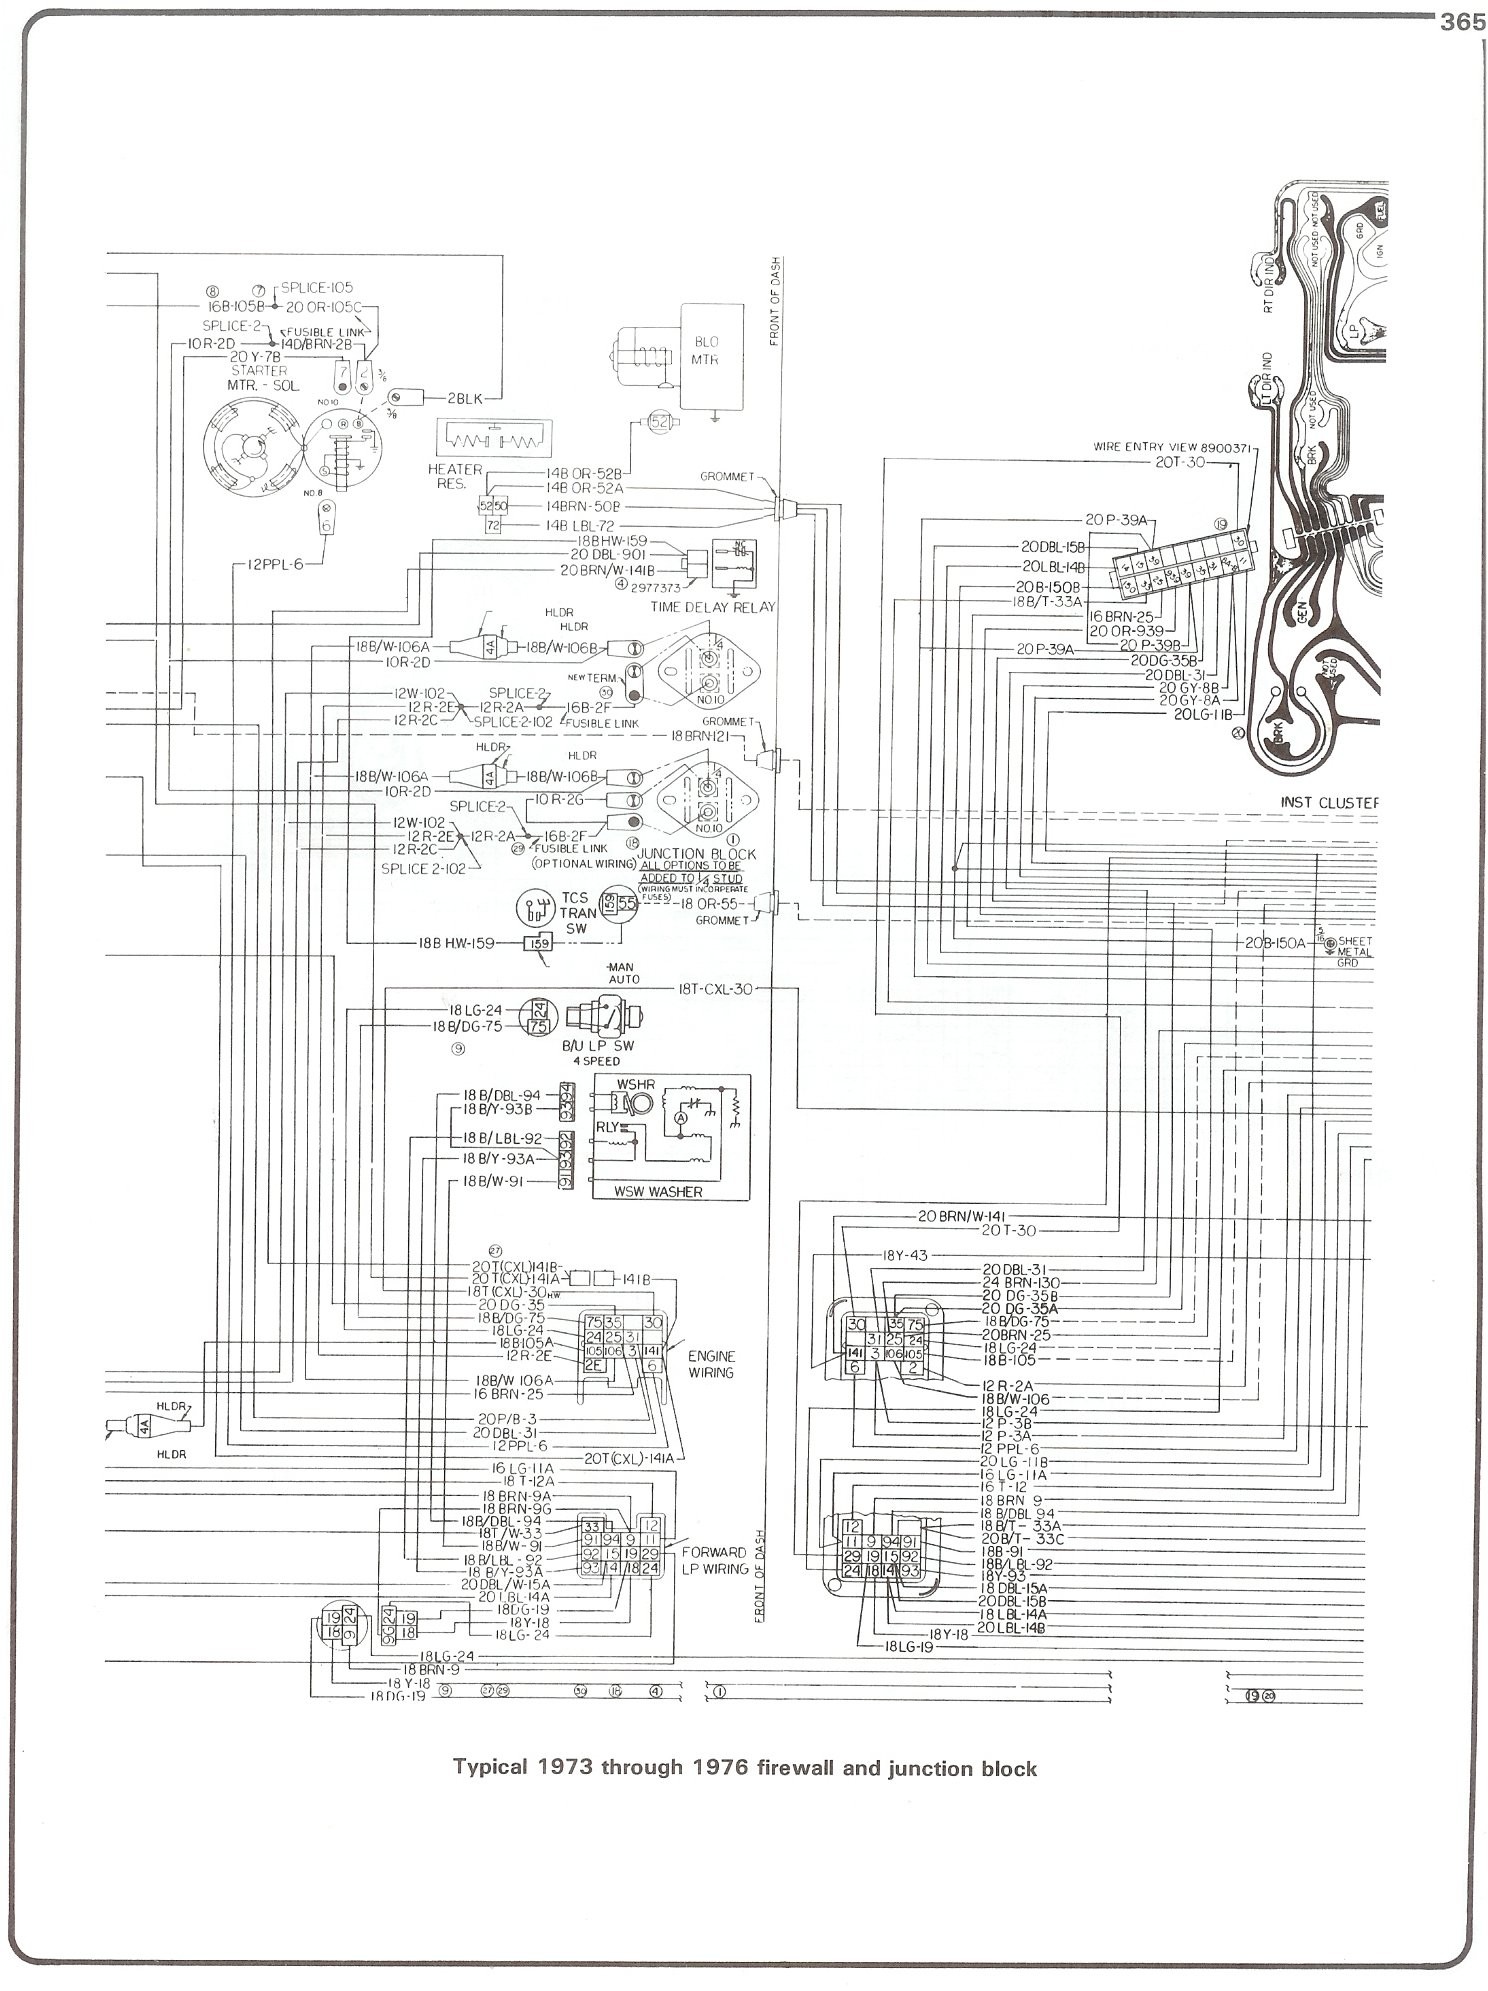 1979 Chevrolet Pickup Electrique Wiring Diagram 73 Chevy C10 Fuse Box Remote Starter Wiring Diagram 99 Of 1979 Chevrolet Pickup Electrique Wiring Diagram